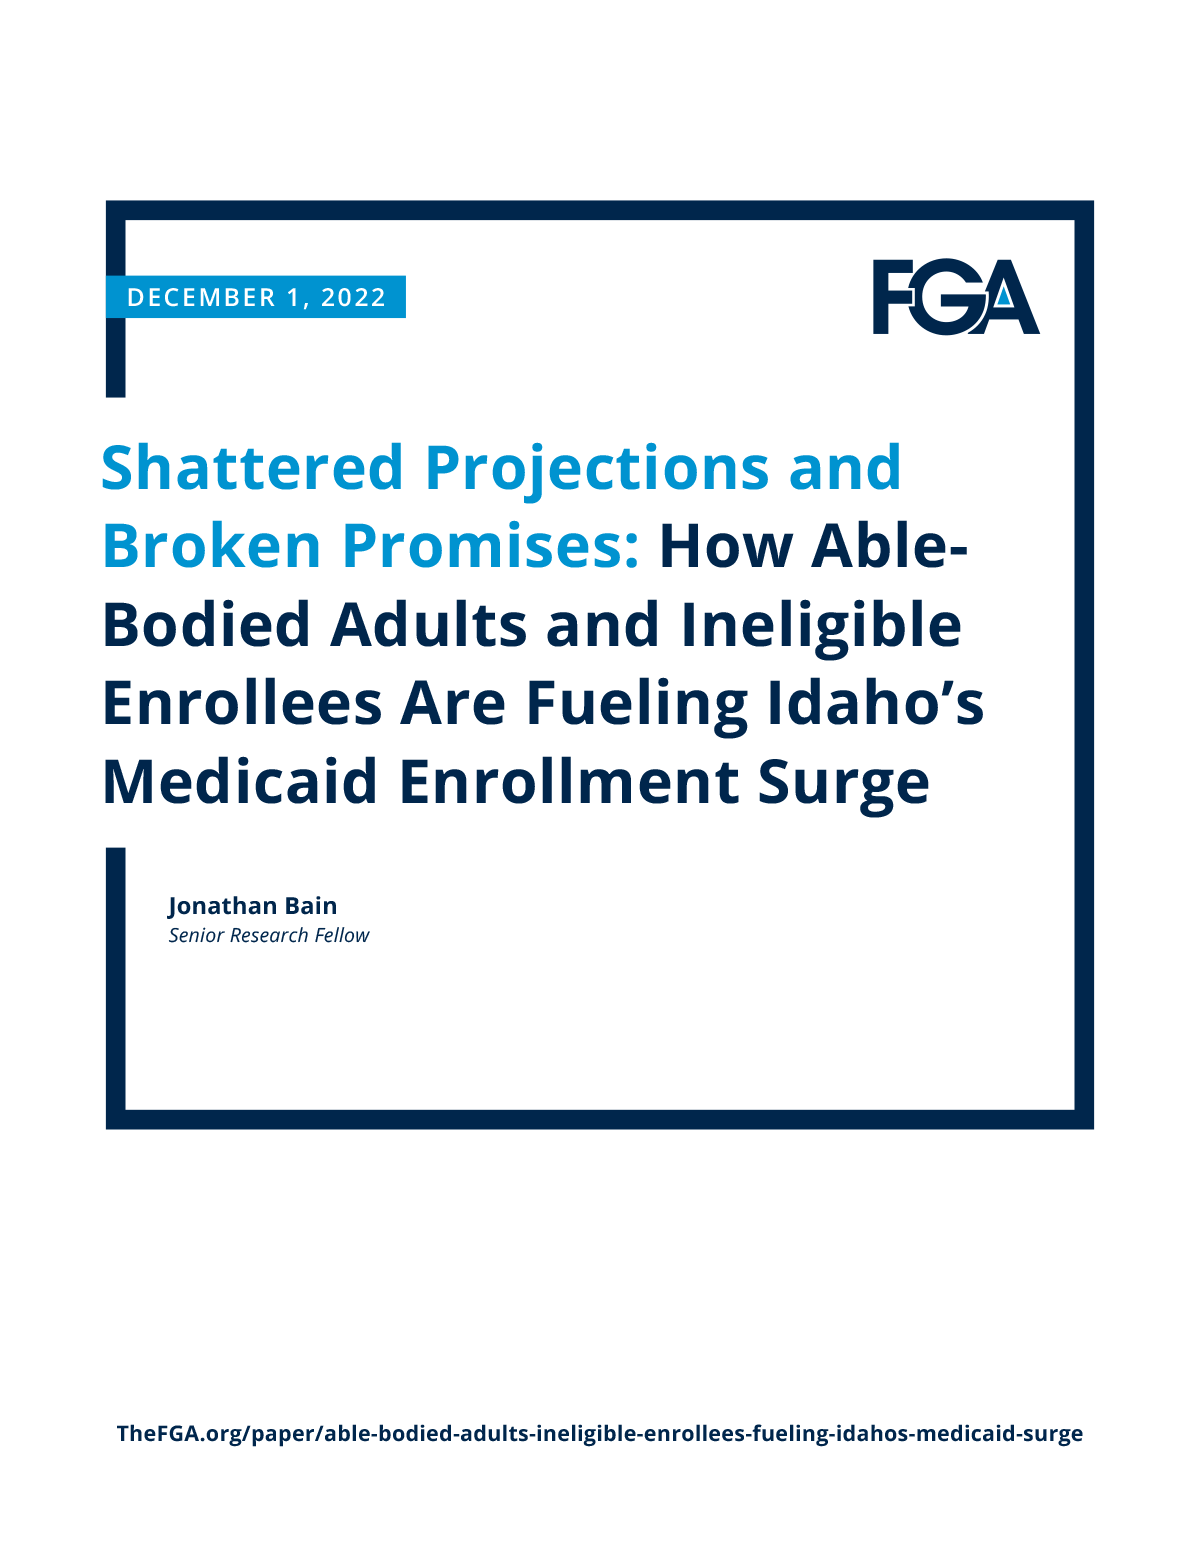 Shattered Projections and Broken Promises: How Able-Bodied Adults and Ineligible Enrollees Are Fueling Idaho’s Medicaid Enrollment Surge